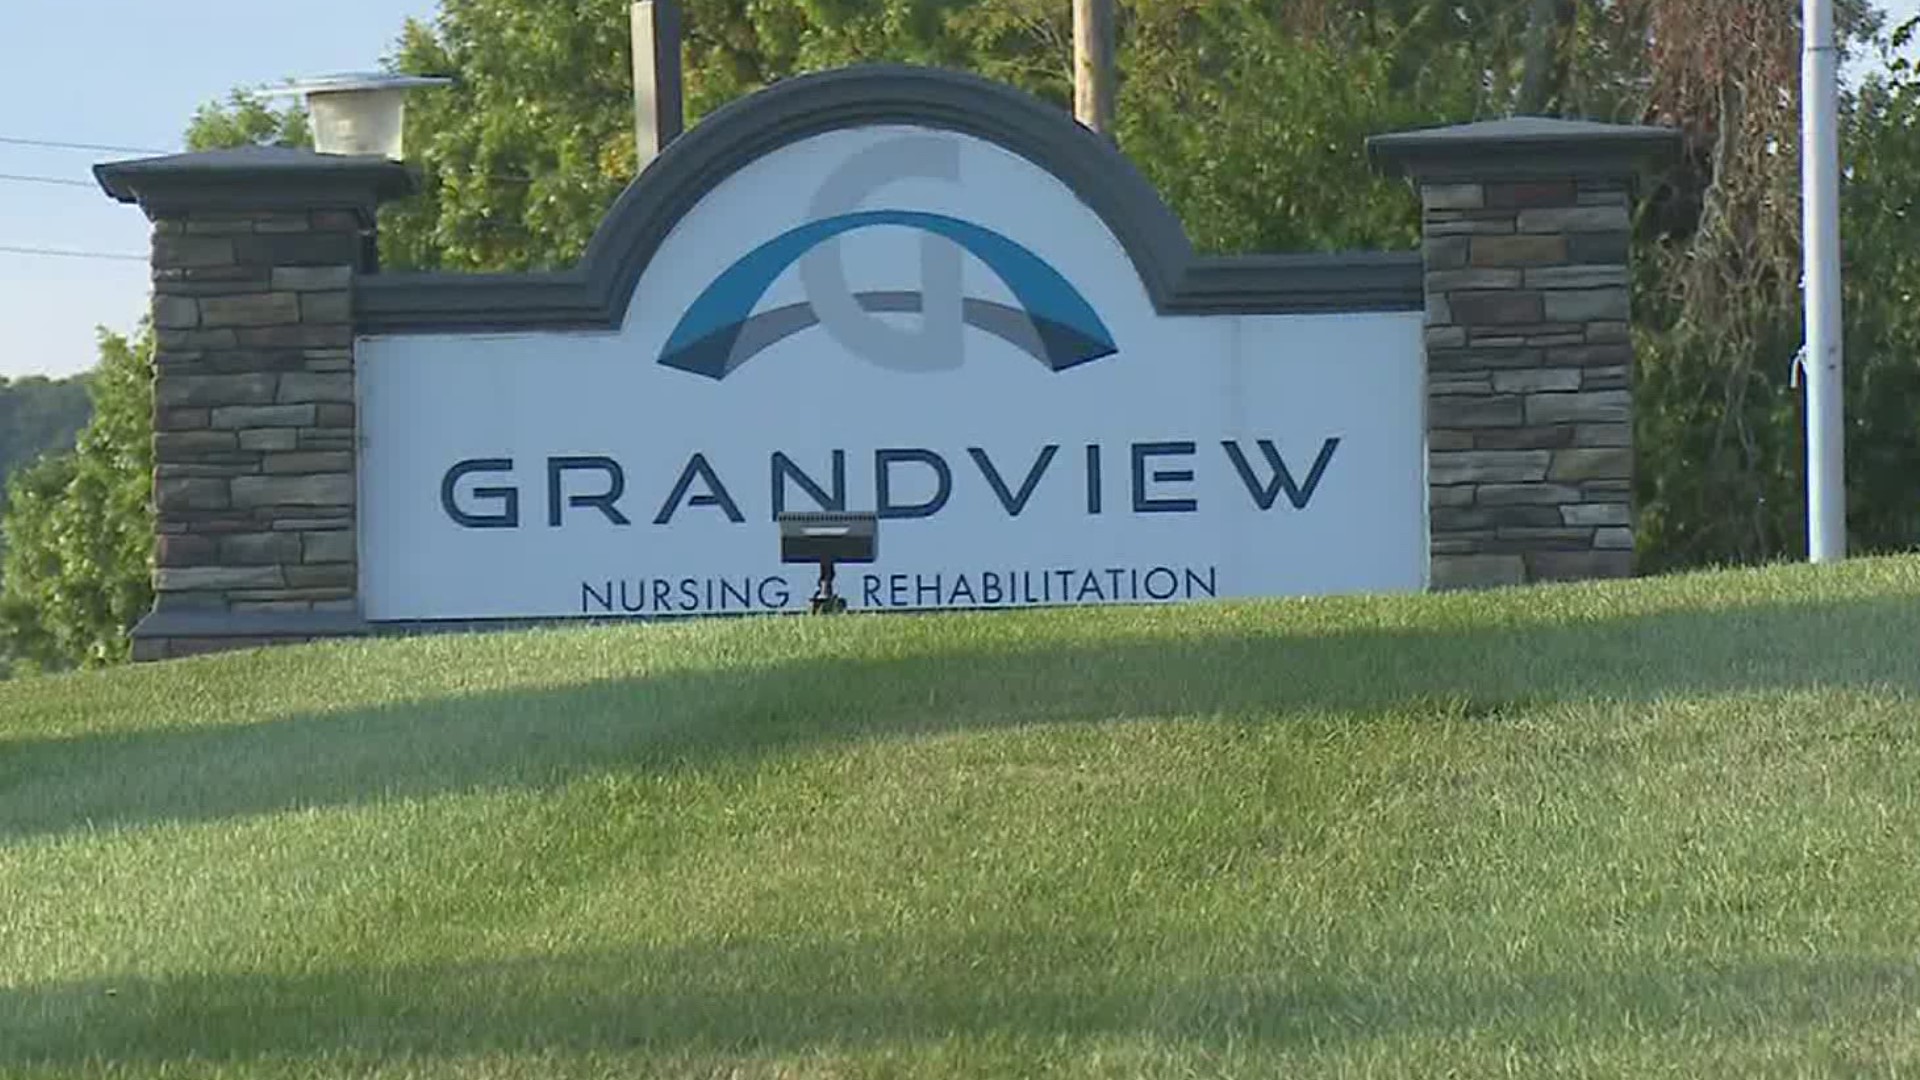 The national guard has been called in to assist after a spike in cases of COVID-19 at a nursing home in Montour County.